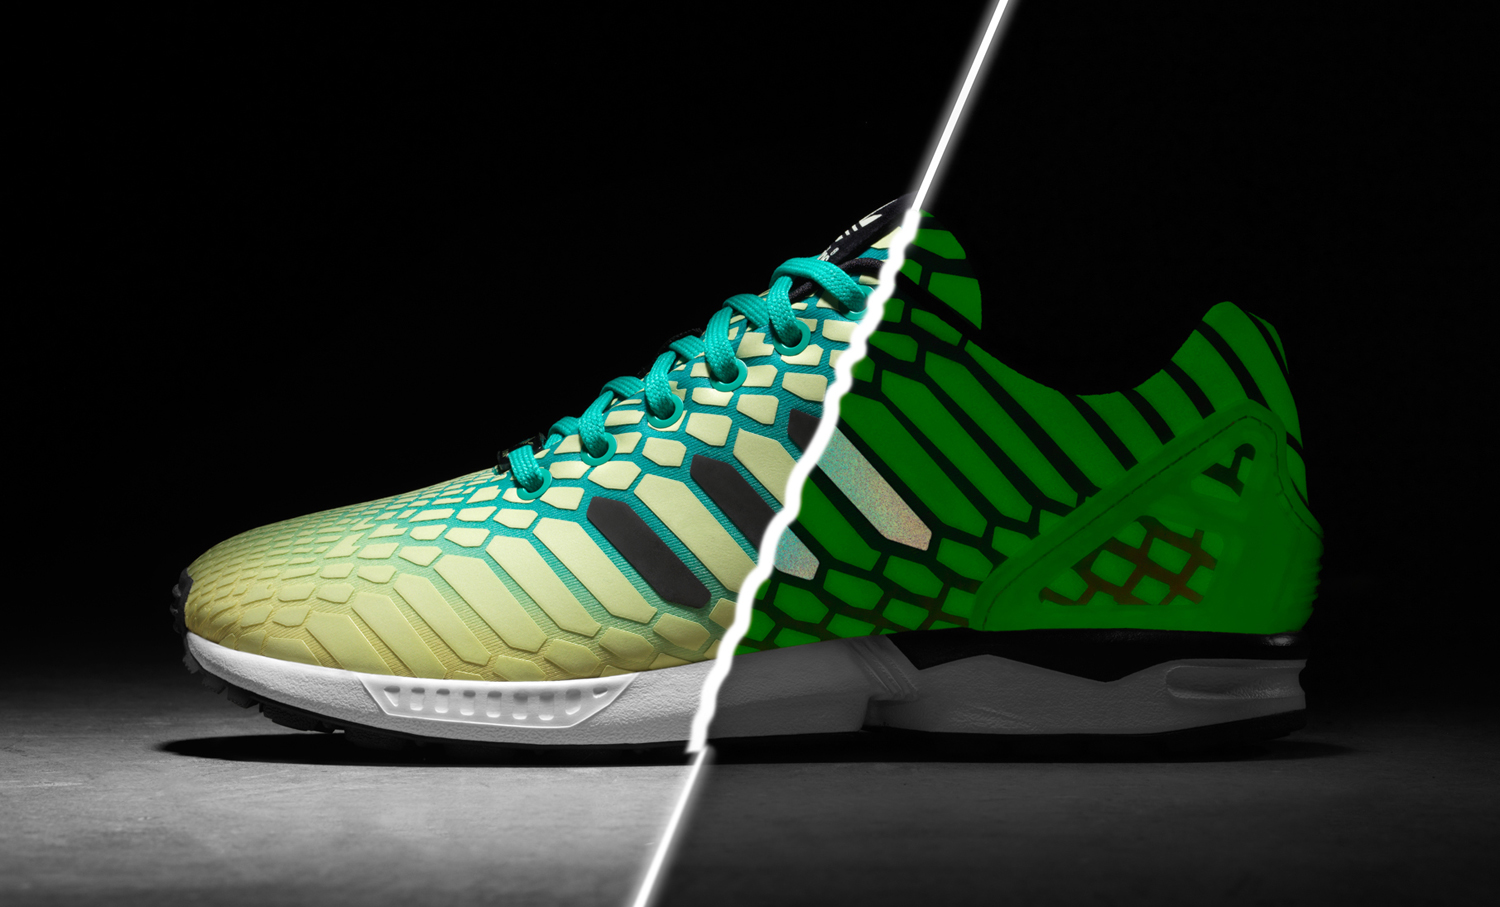  Adidas  Lights Up All Star Weekend With Glow  in the Dark  